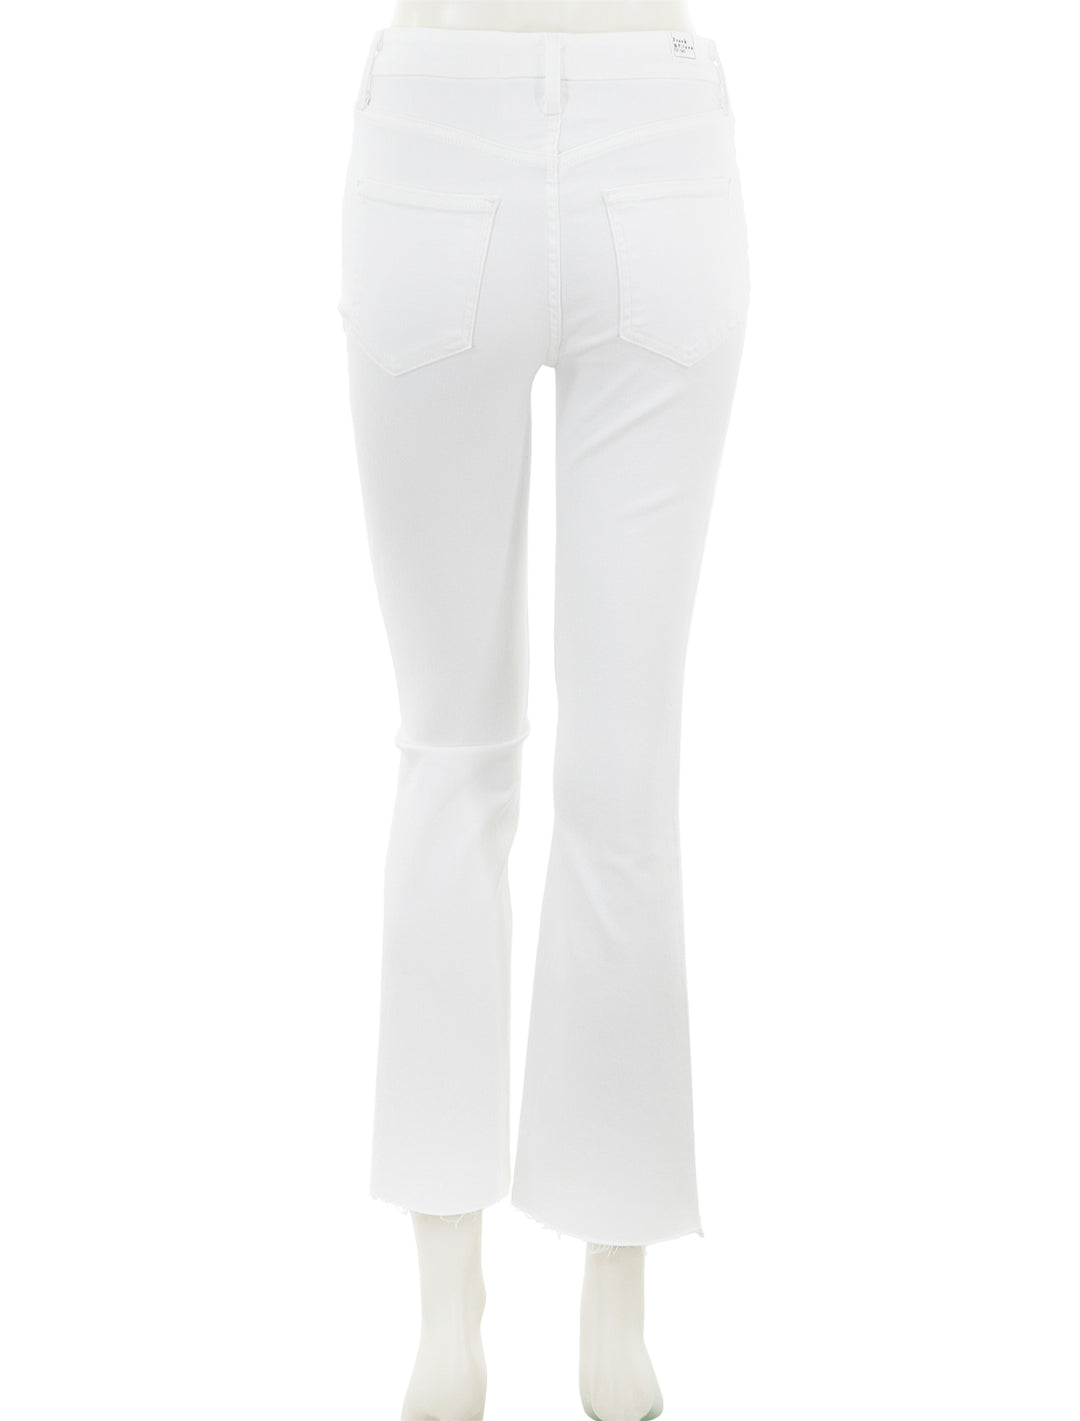 Back view of Frank & Eileen's killian crop flares in white.